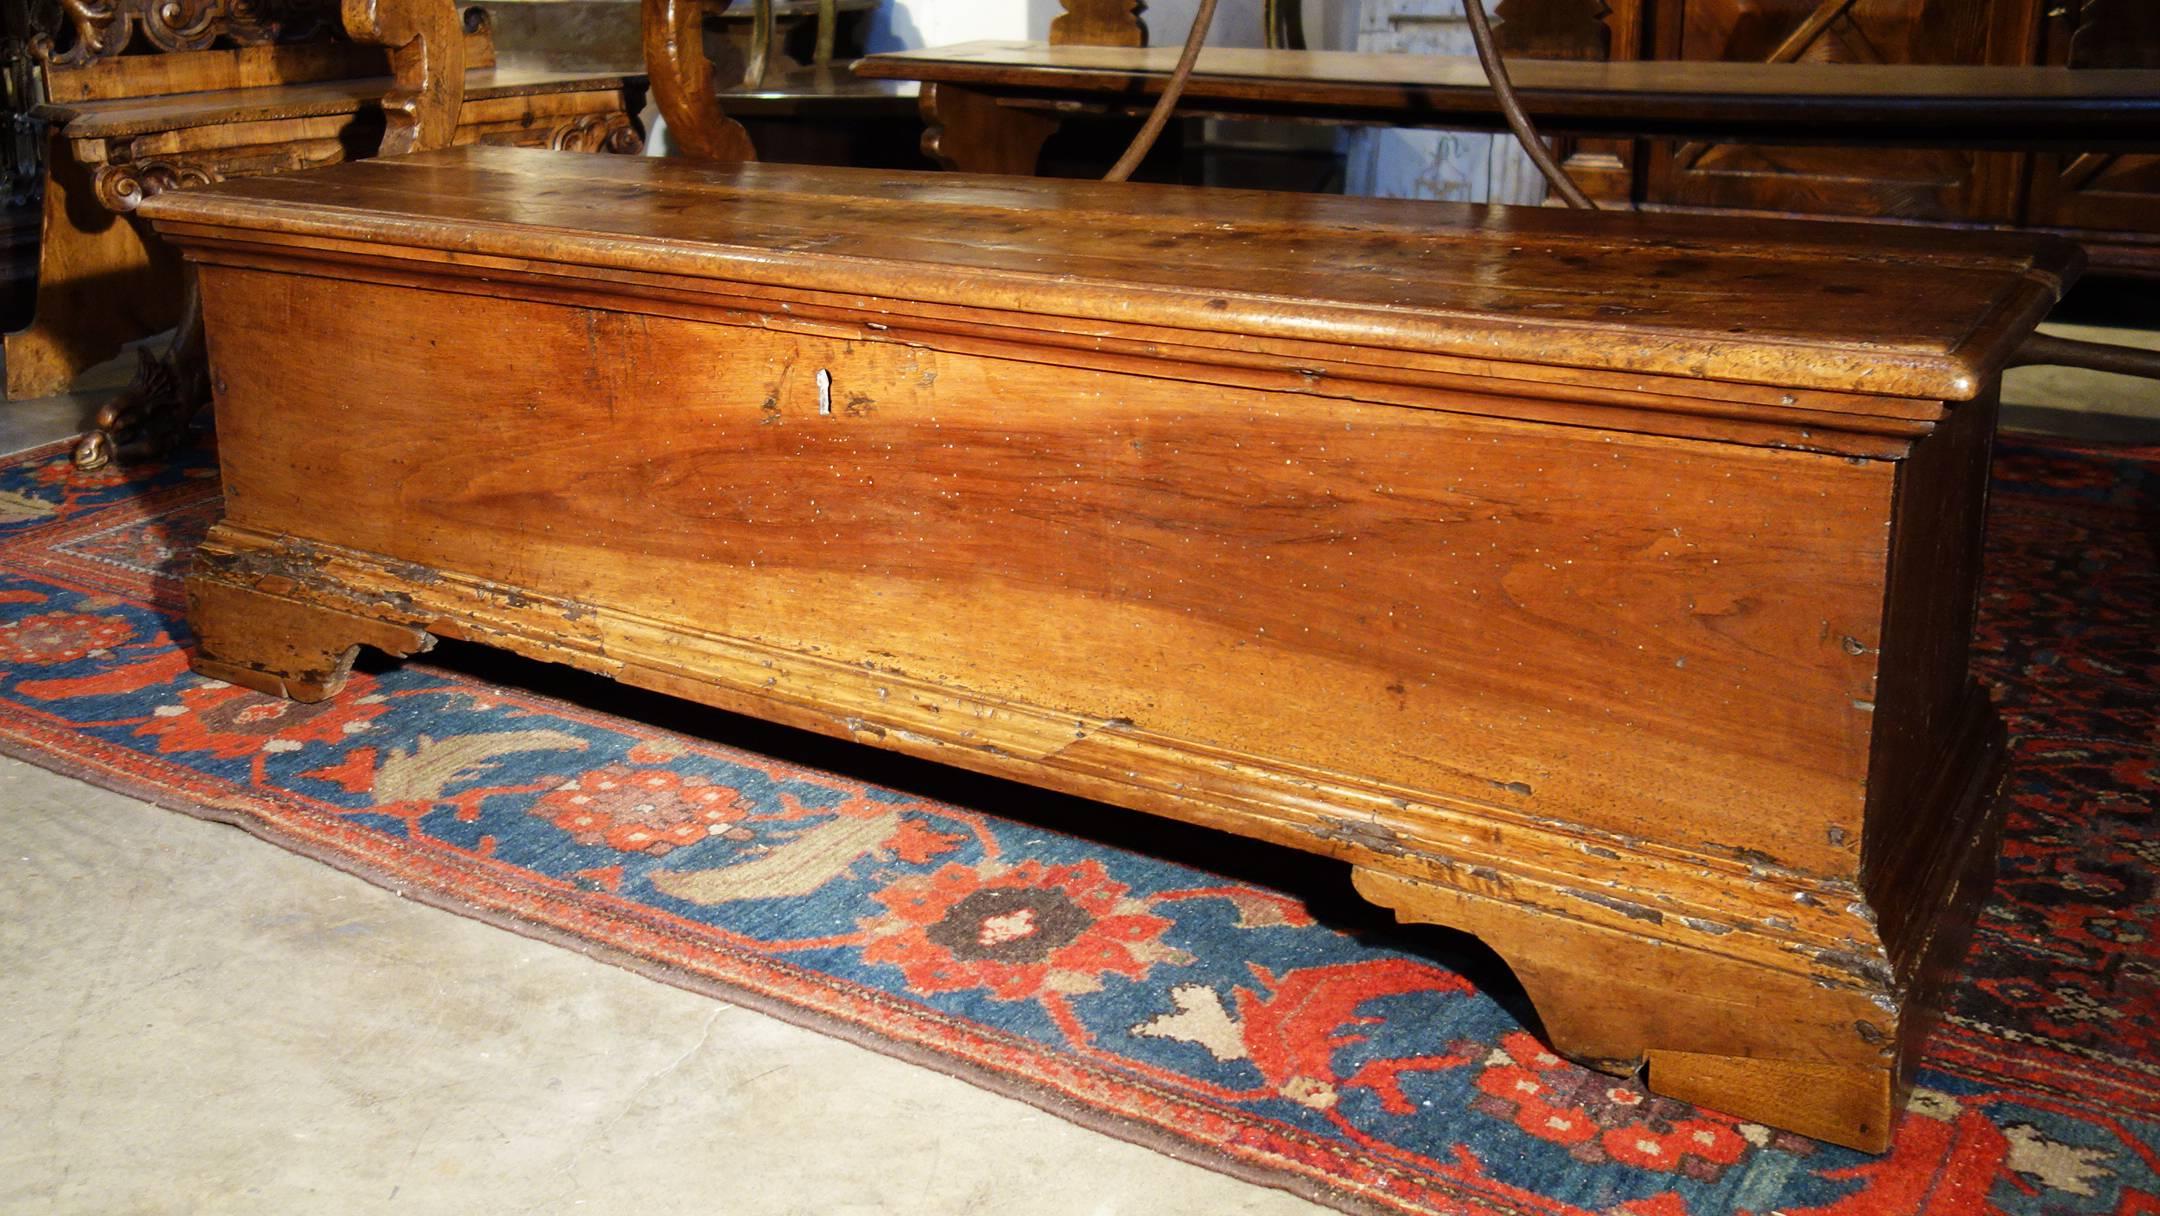 Hand-Crafted 17th Century Italian Old Walnut Tuscan Rustic Primitive Trunk Chest Circa 1690